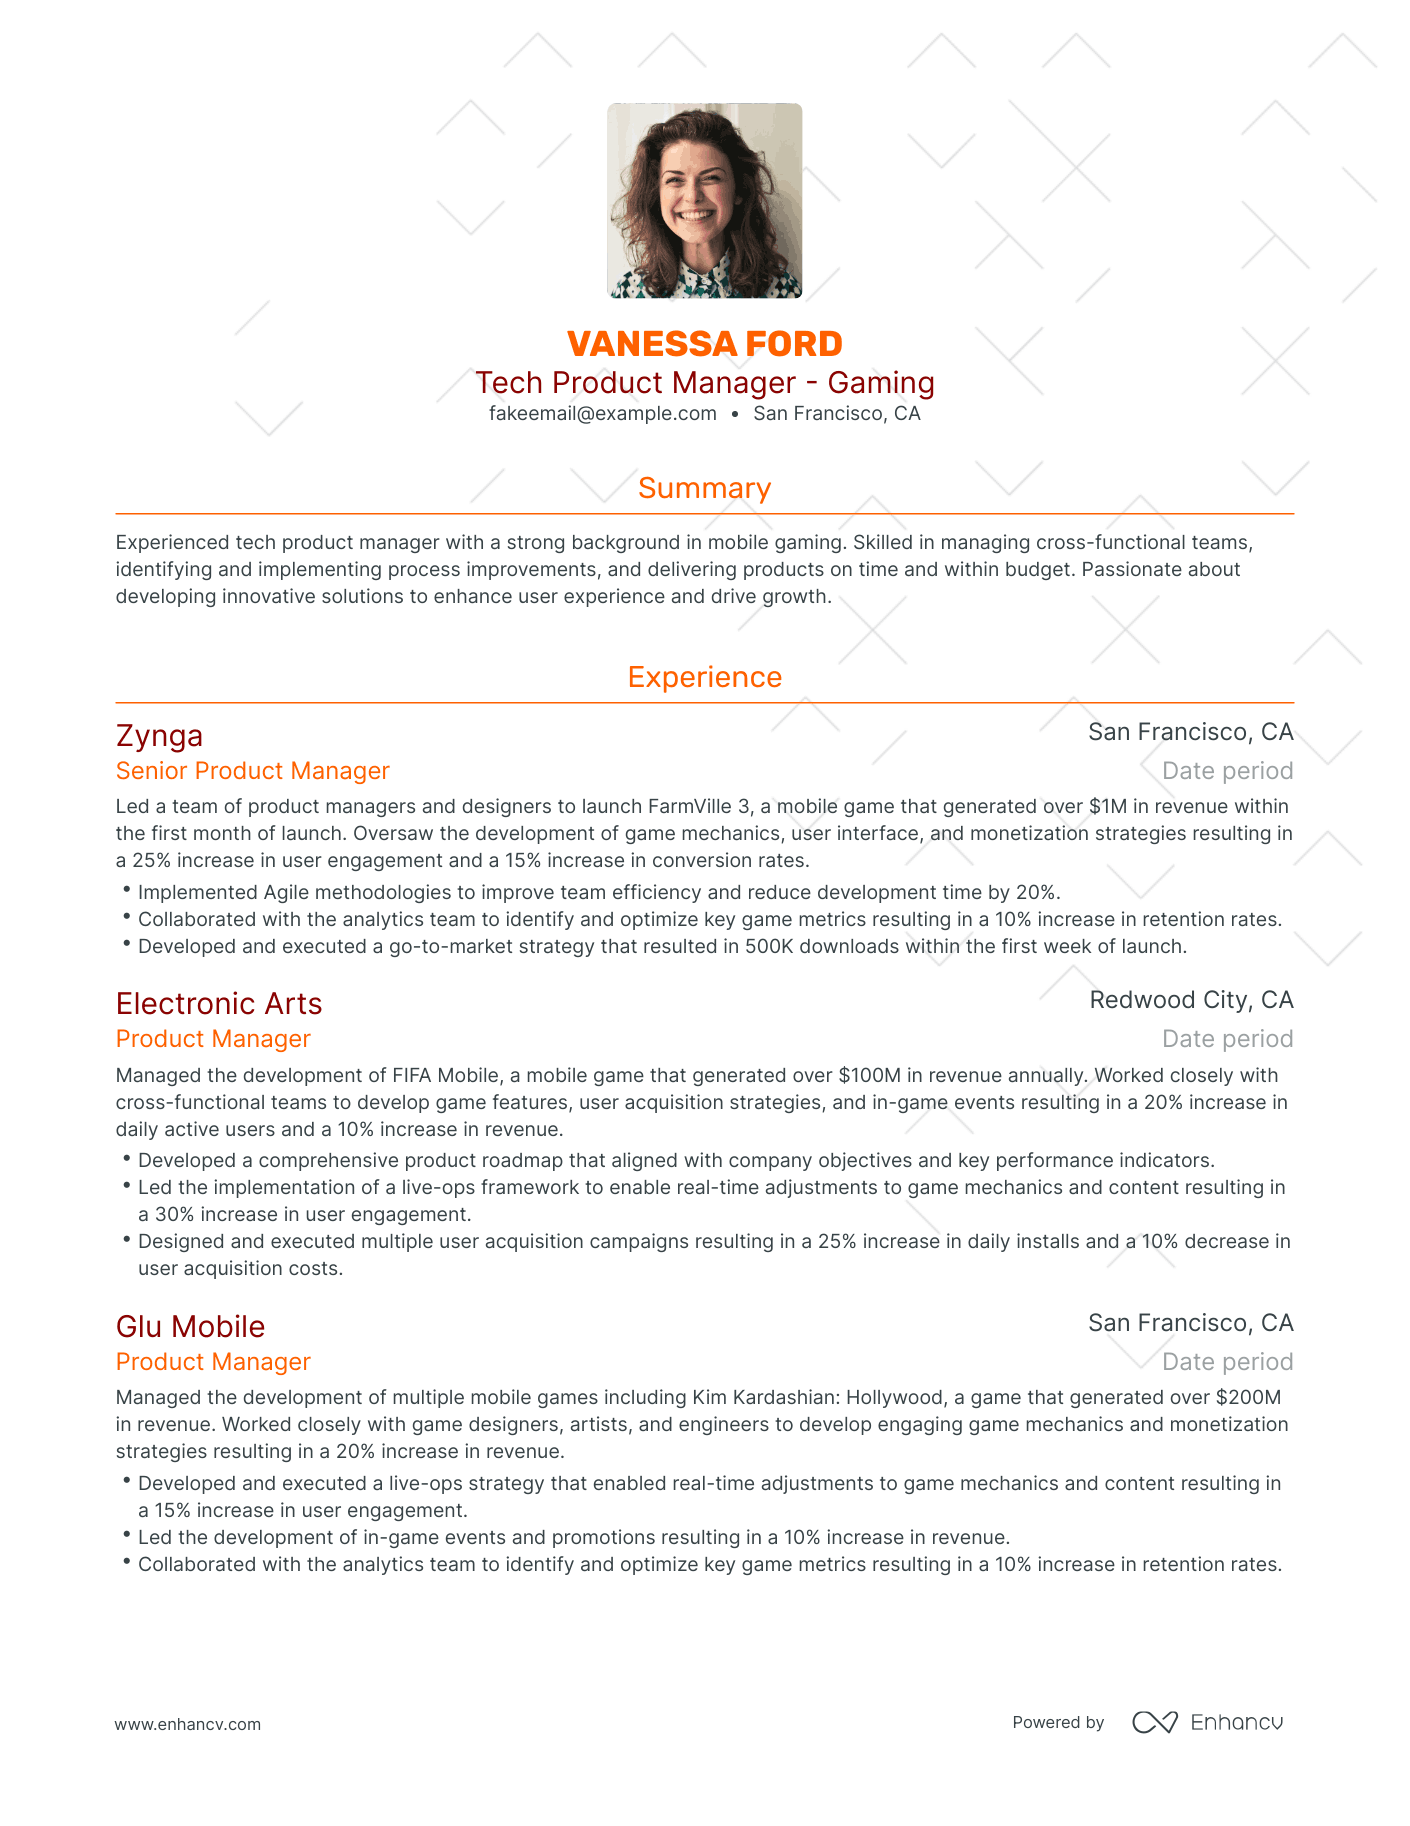 Traditional Tech Product Manager Resume Template